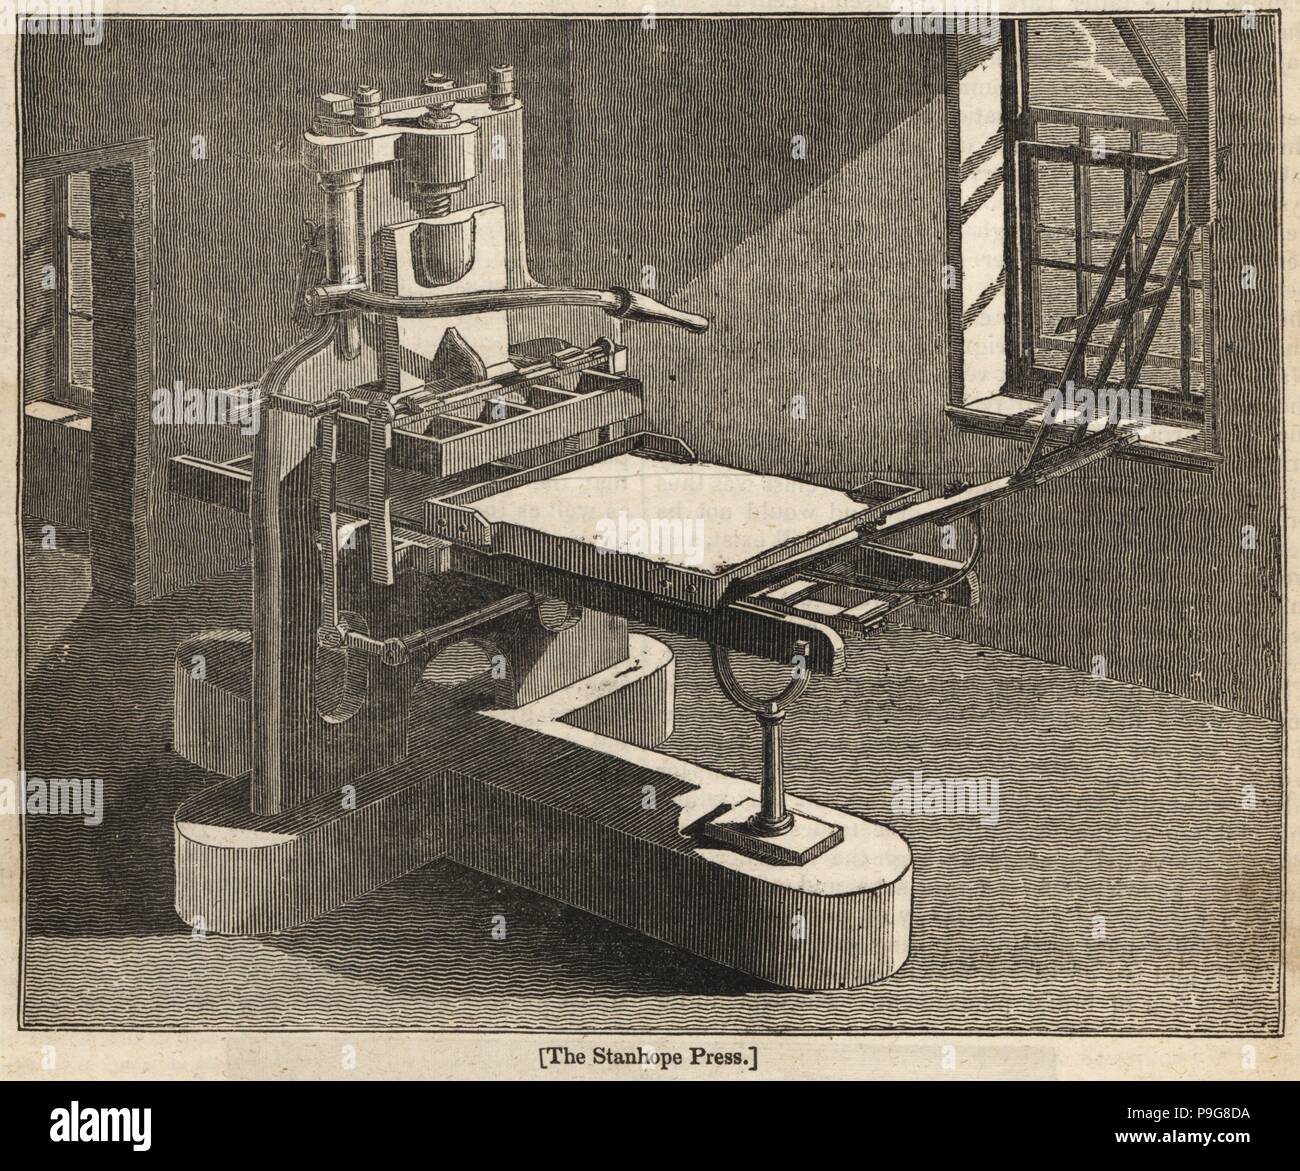 The first iron printing press invented by Charles Stanhope, 3rd Earl Stanhope. Woodblock engraving from the Penny Magazine, Society for the Diffusion of Useful Knowledge, 1833. Stock Photo